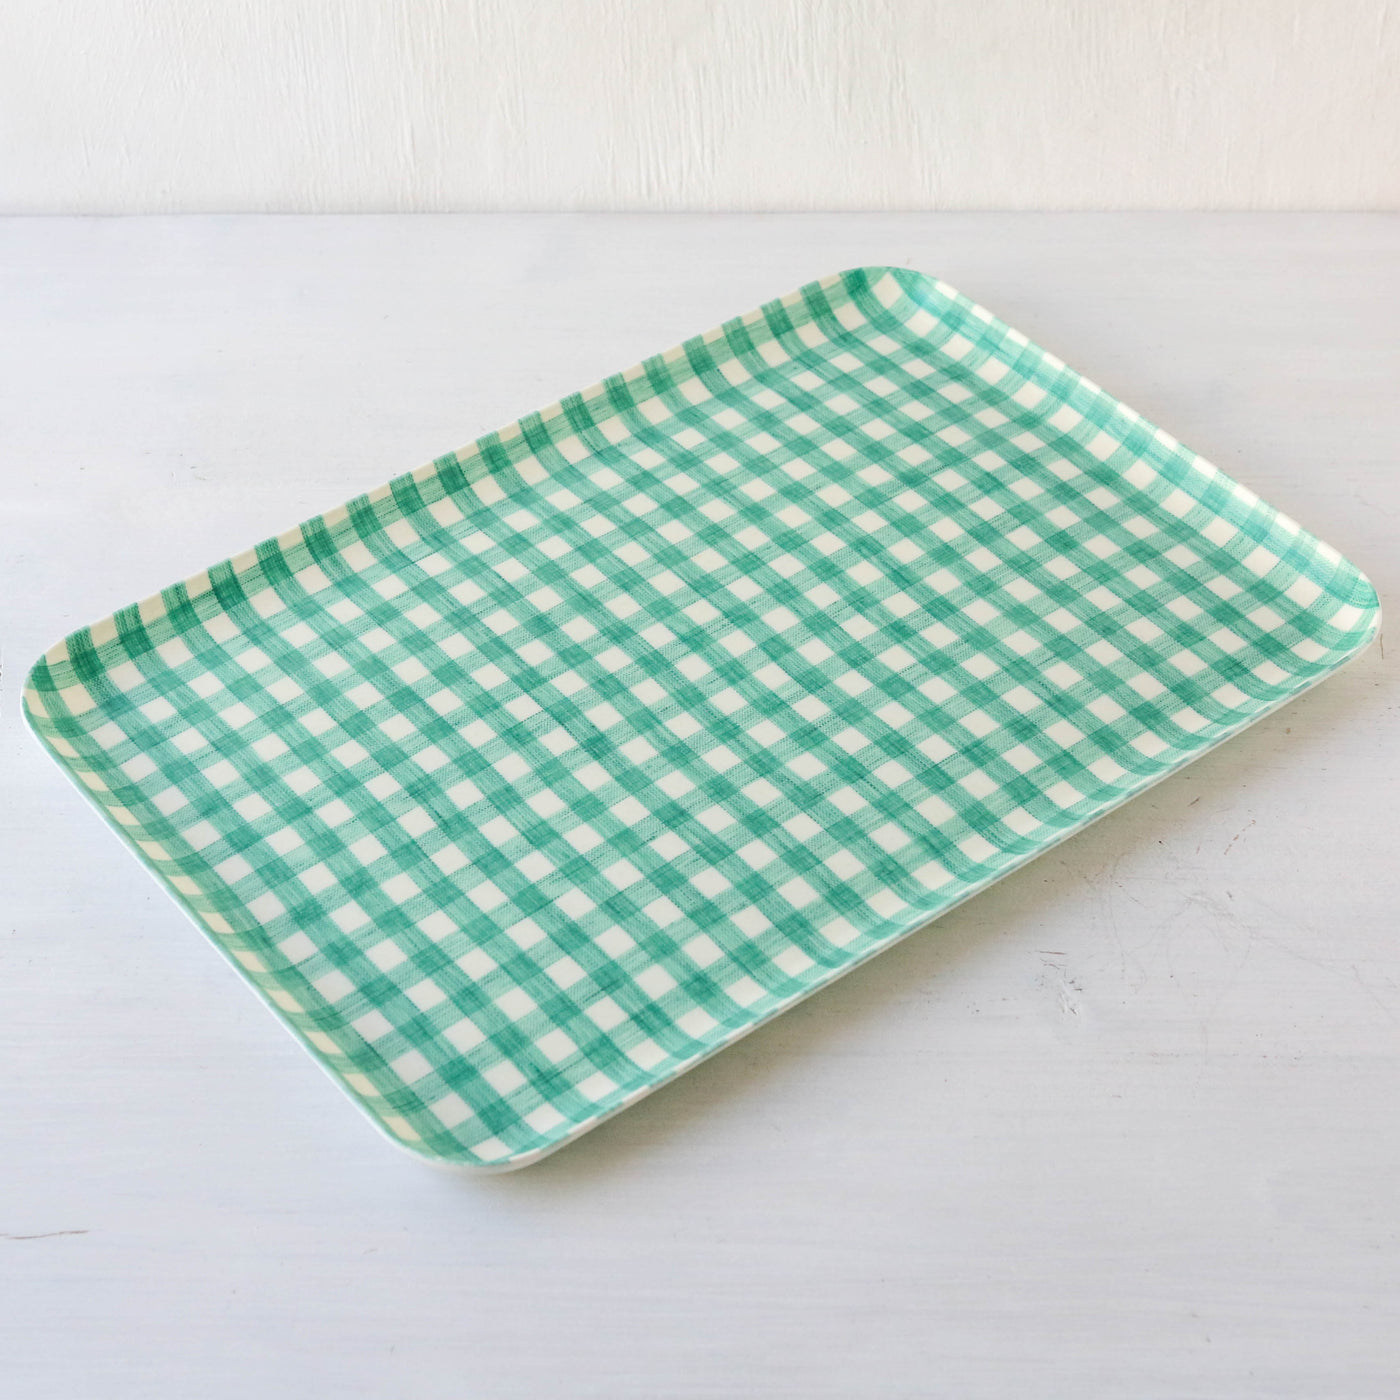 Coated Linen Tray - Large